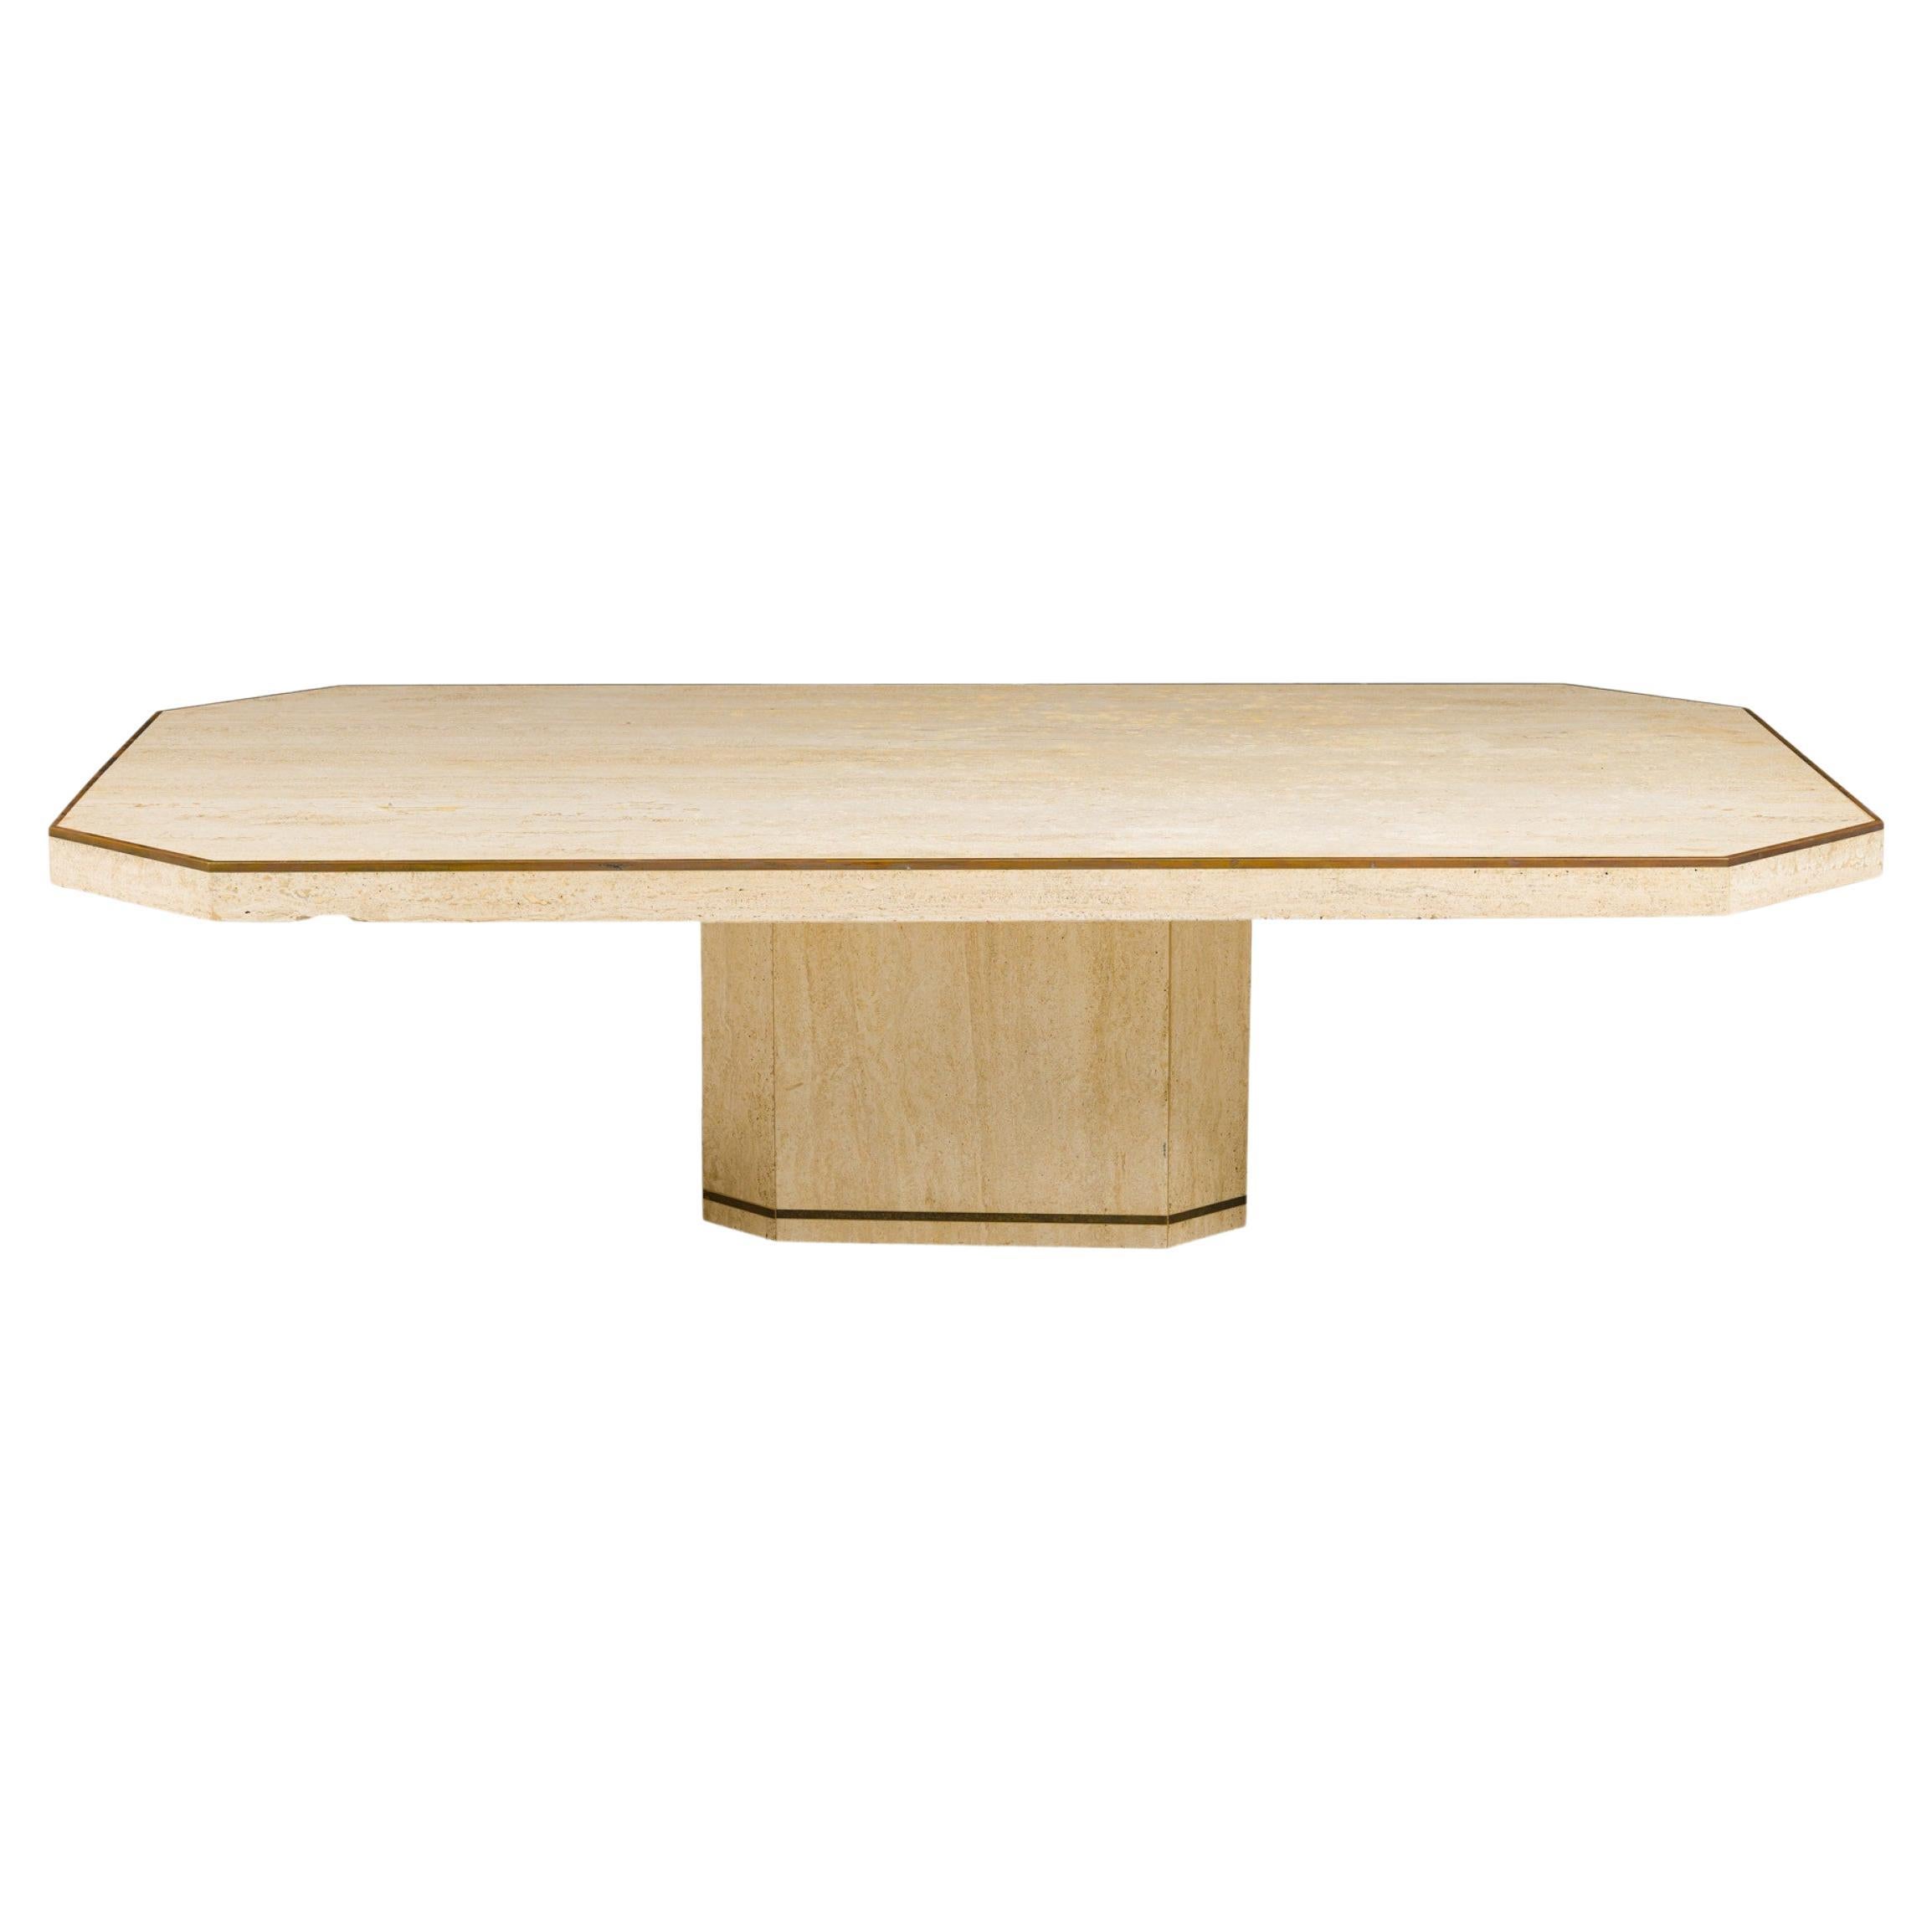 Willy Rizzo for Jean Charles Italian Monumental Travertine Marble Coffee Table For Sale